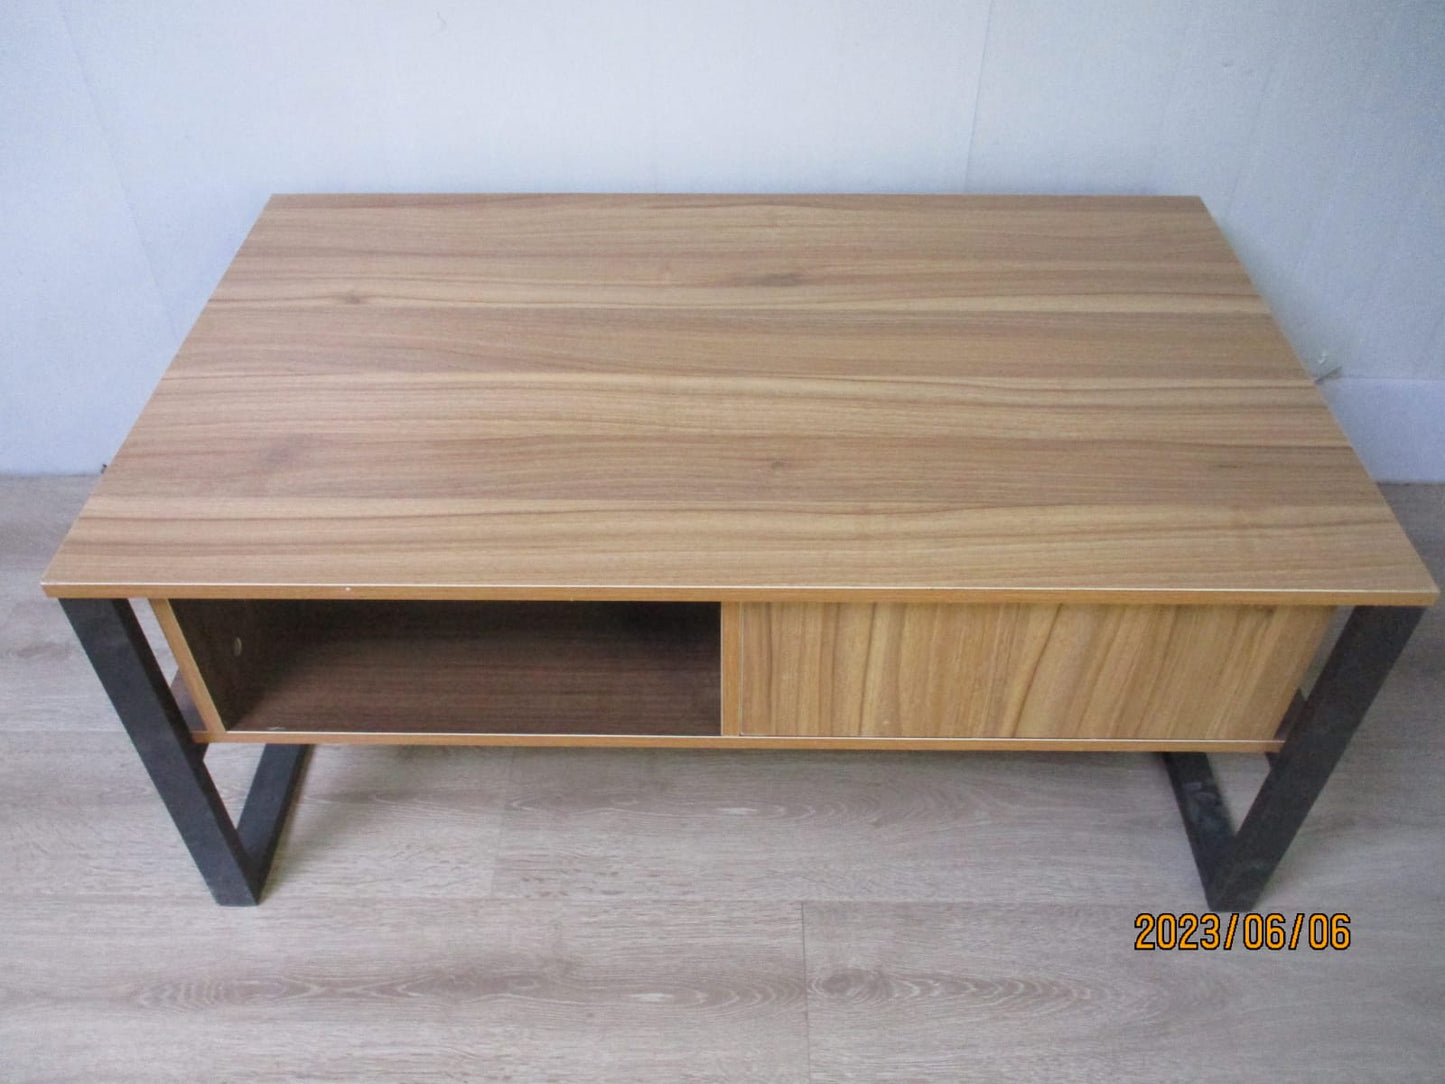 Brand New Modern Coffee Table – Solid Medium-Sized Rectangular Salish Coffee Table with Storage Space